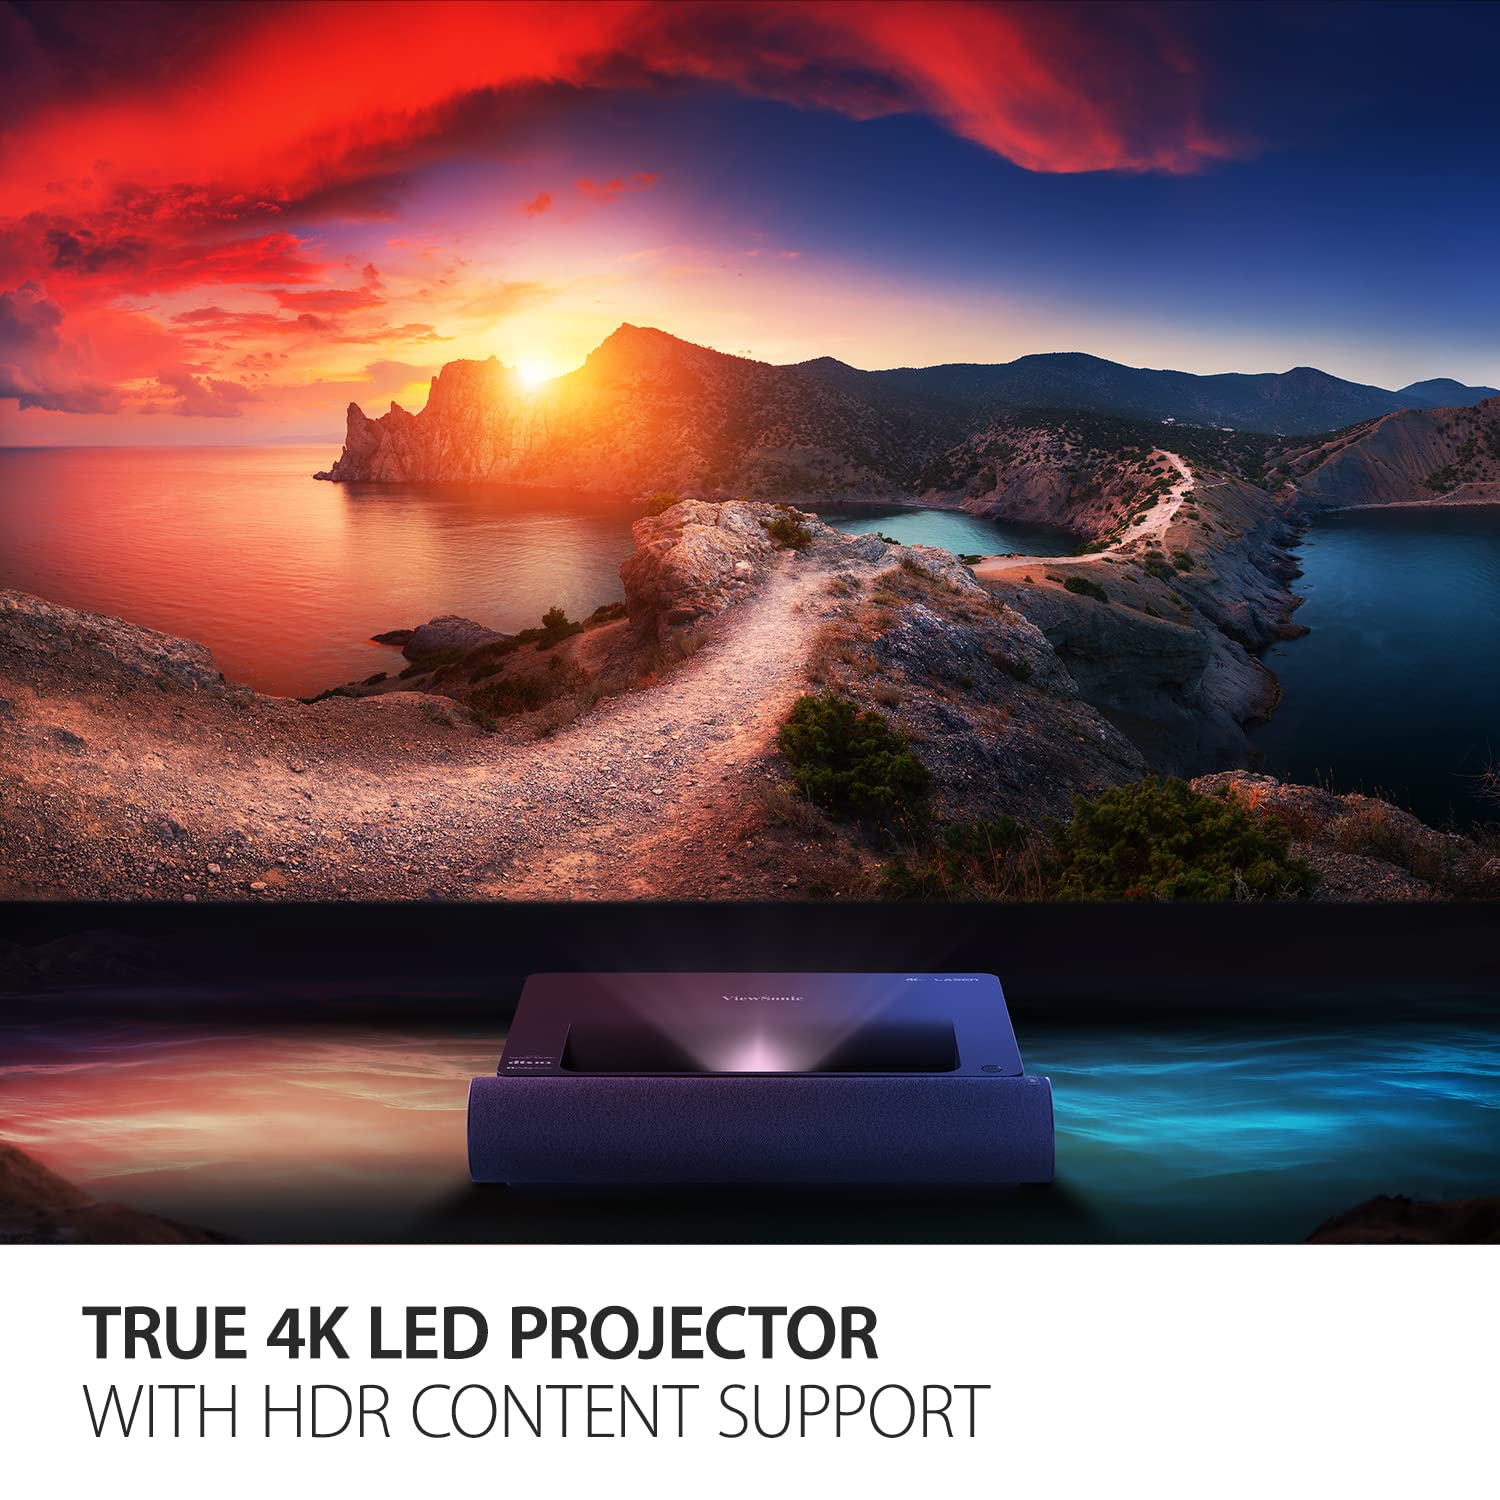 ViewSonic X2000B-4K Ultra Short Throw 4K UHD Laser Projector with 2000 Lumens, Wi-Fi Connectivity, Cinematic Colors, Dolby and DTS Soundtracks Support for Home Theater